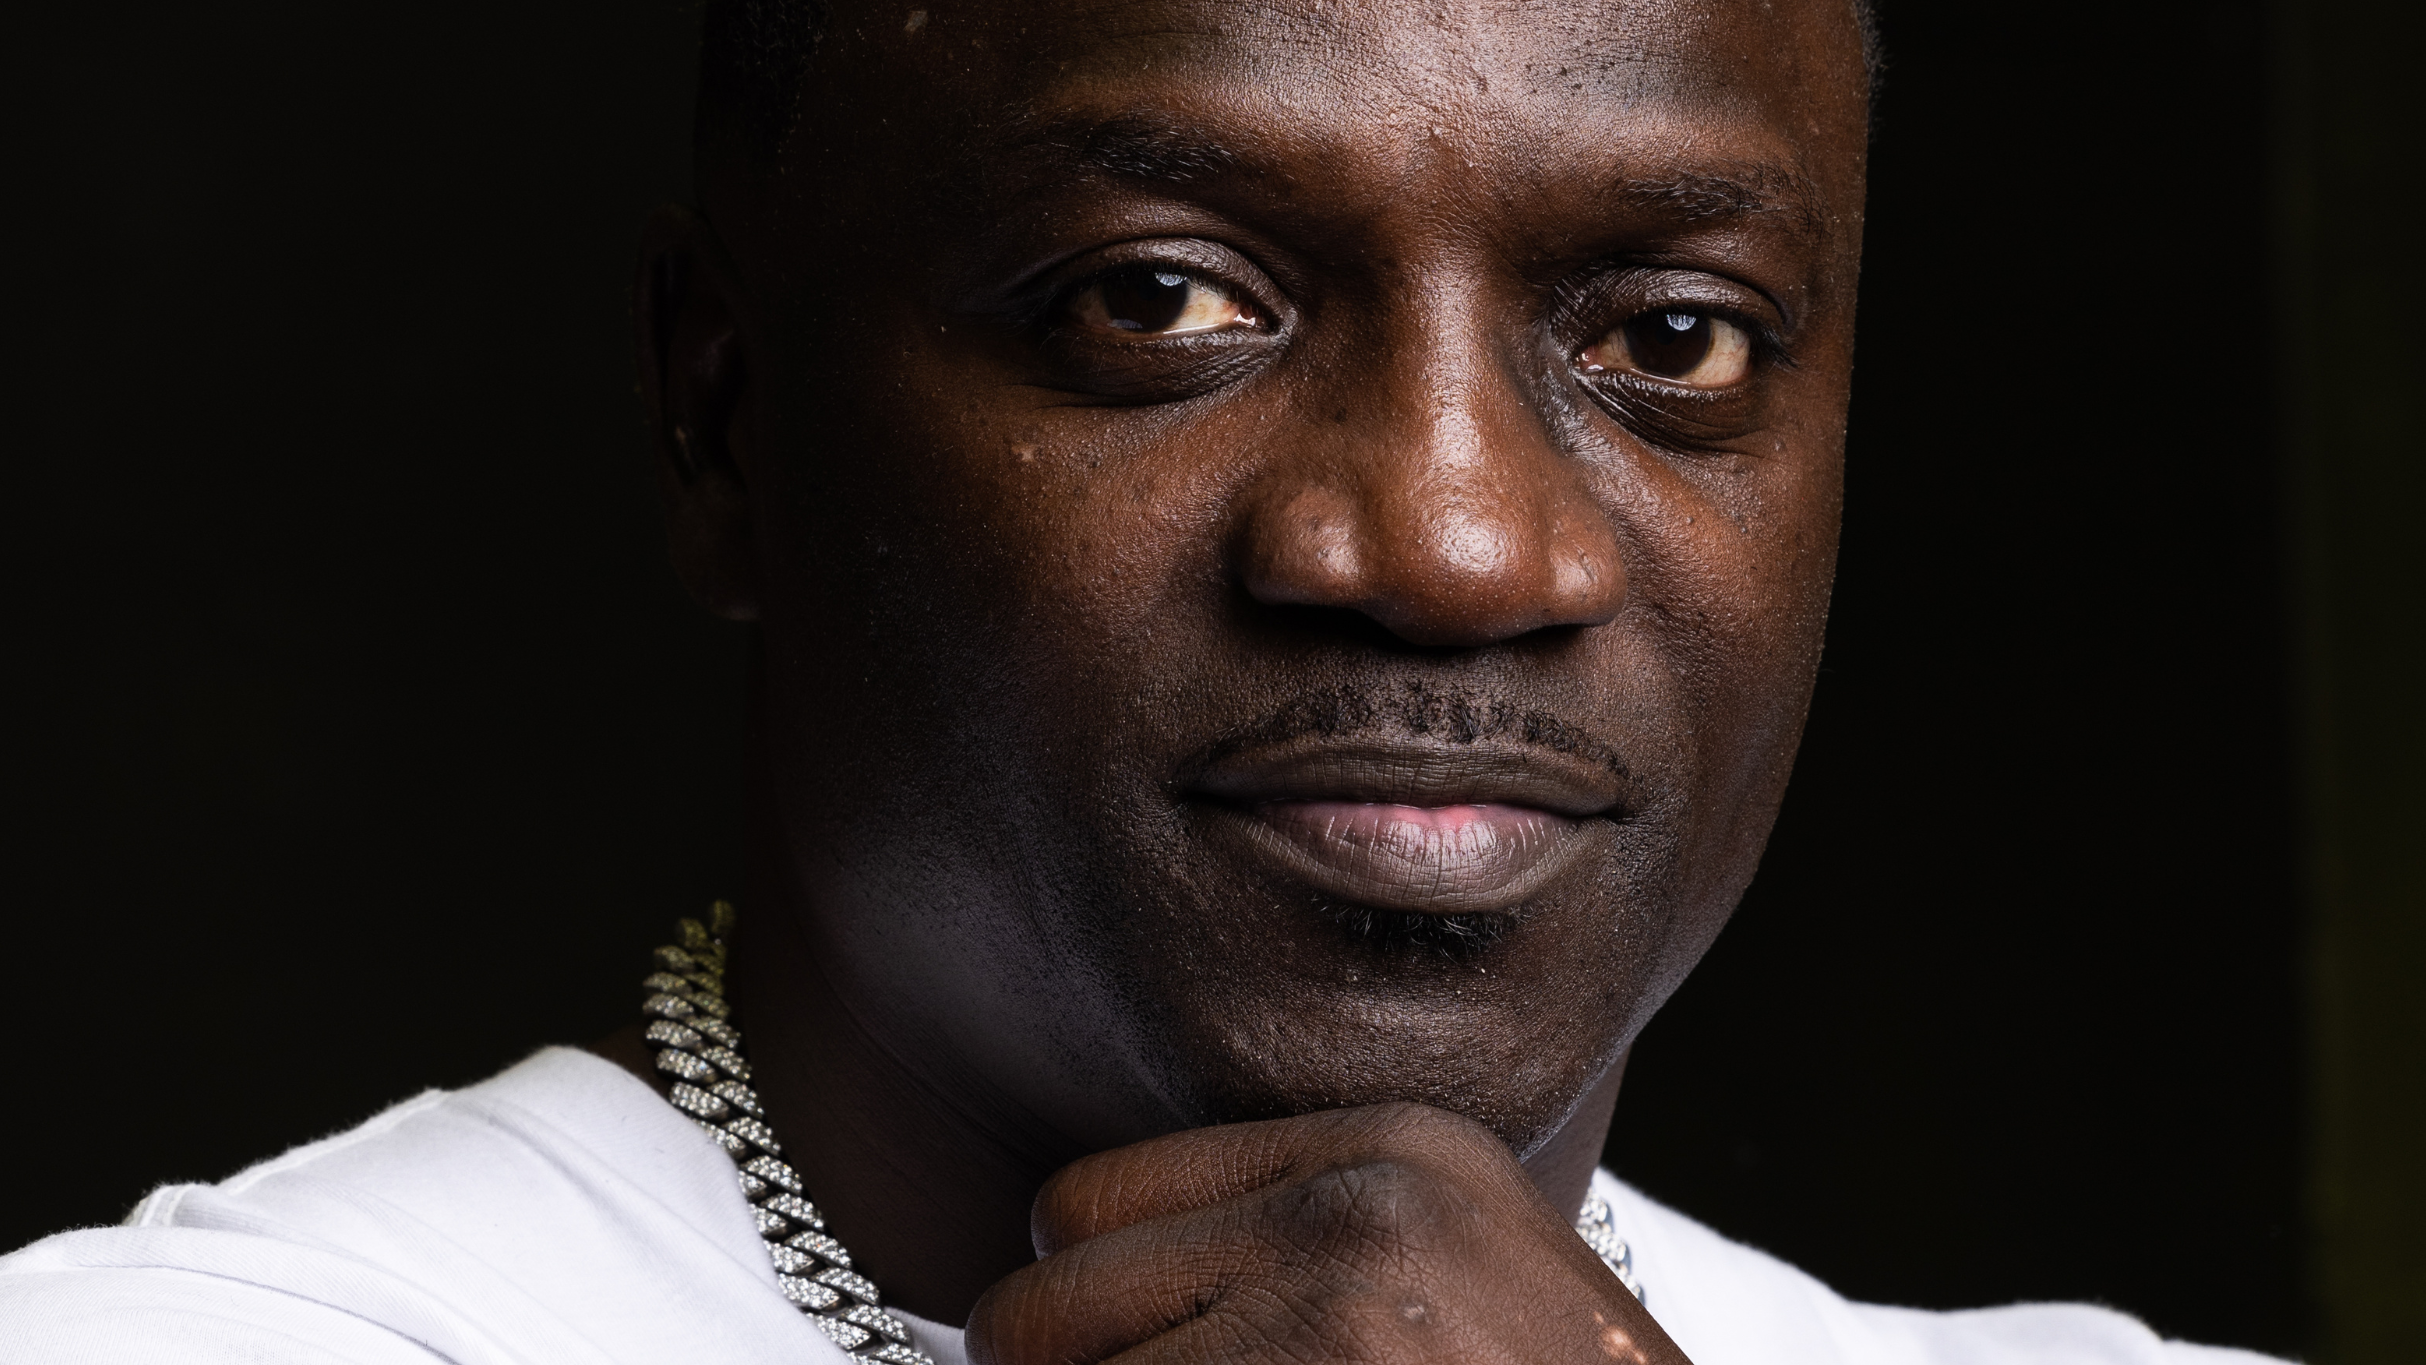 members only presale code to AKON Super Fan Tour presale tickets in Toronto at REBEL